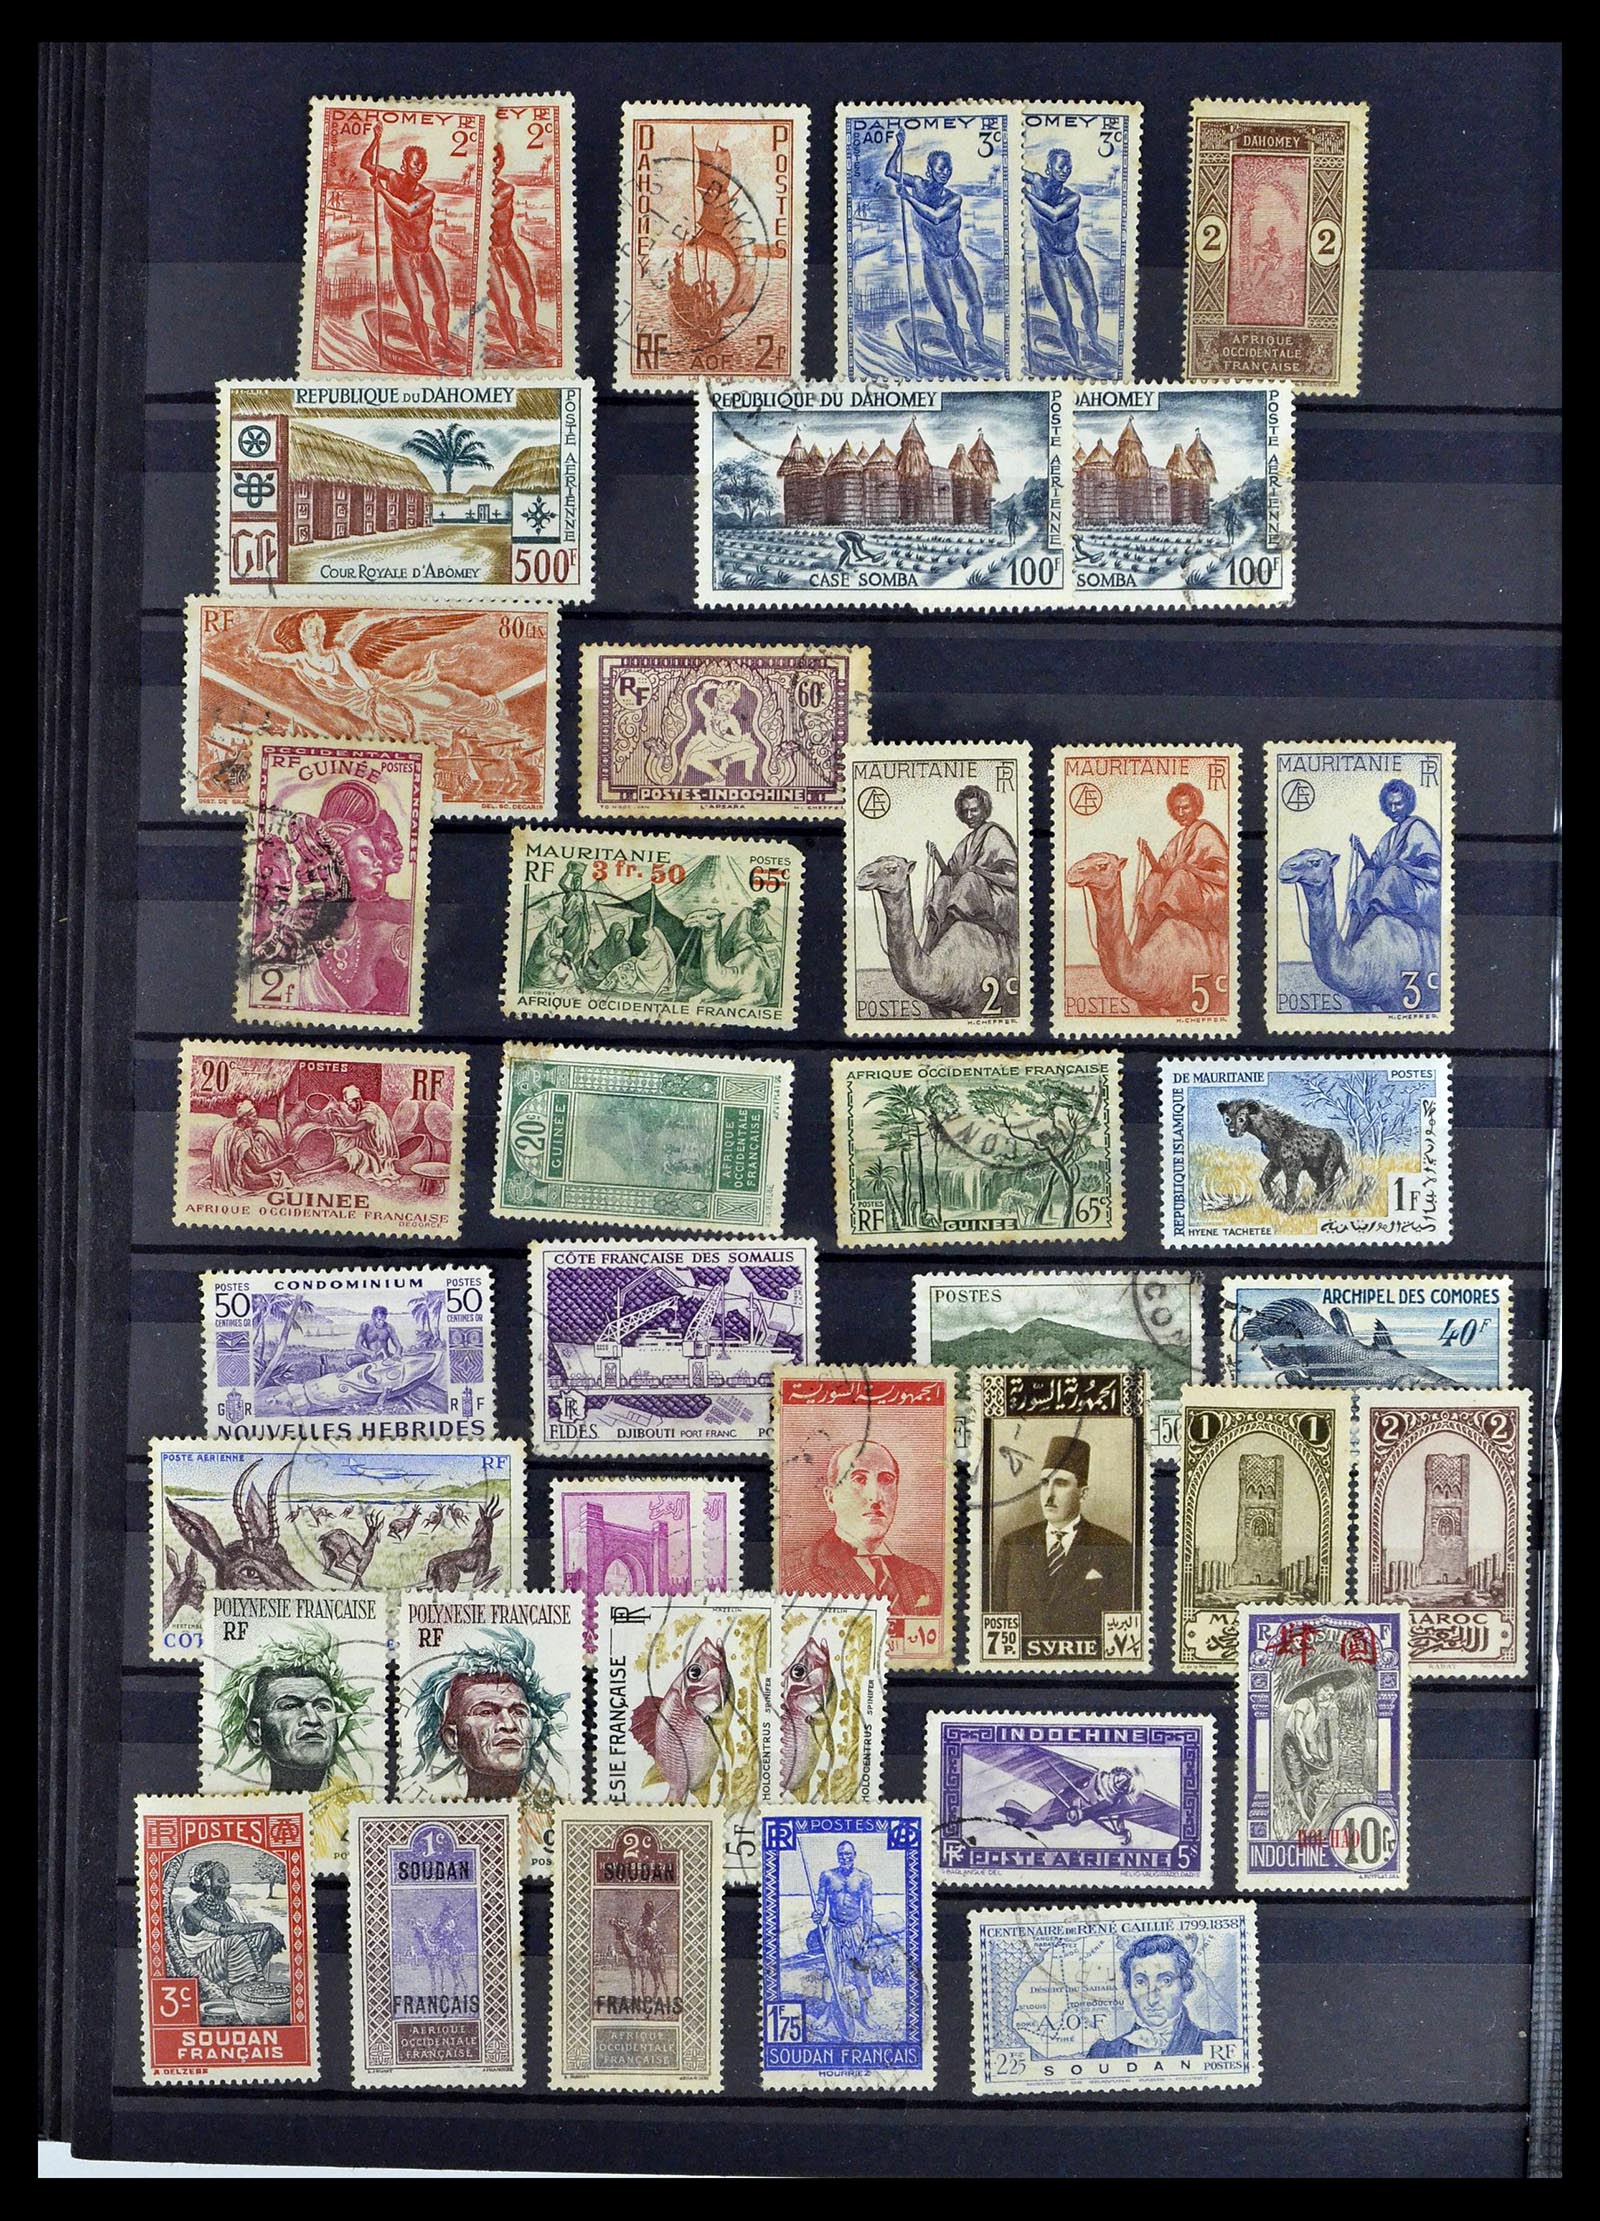 39097 0022 - Stamp collection 39097 French colonies 1880-2000.